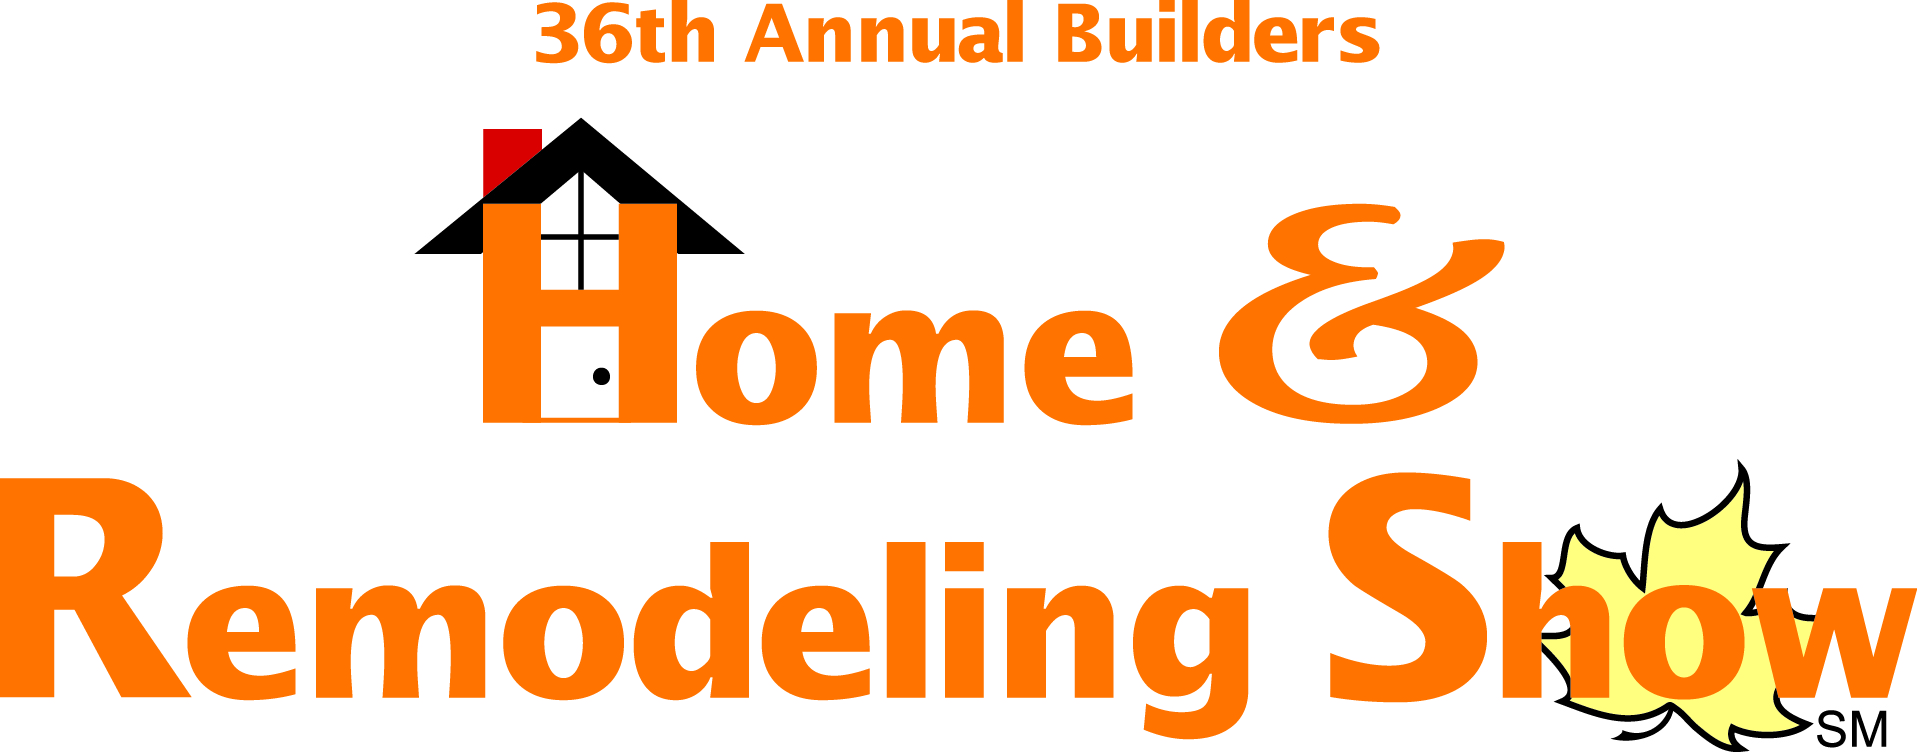 The Builders Home & Remodeling Show is the place to go to get those home projects done!